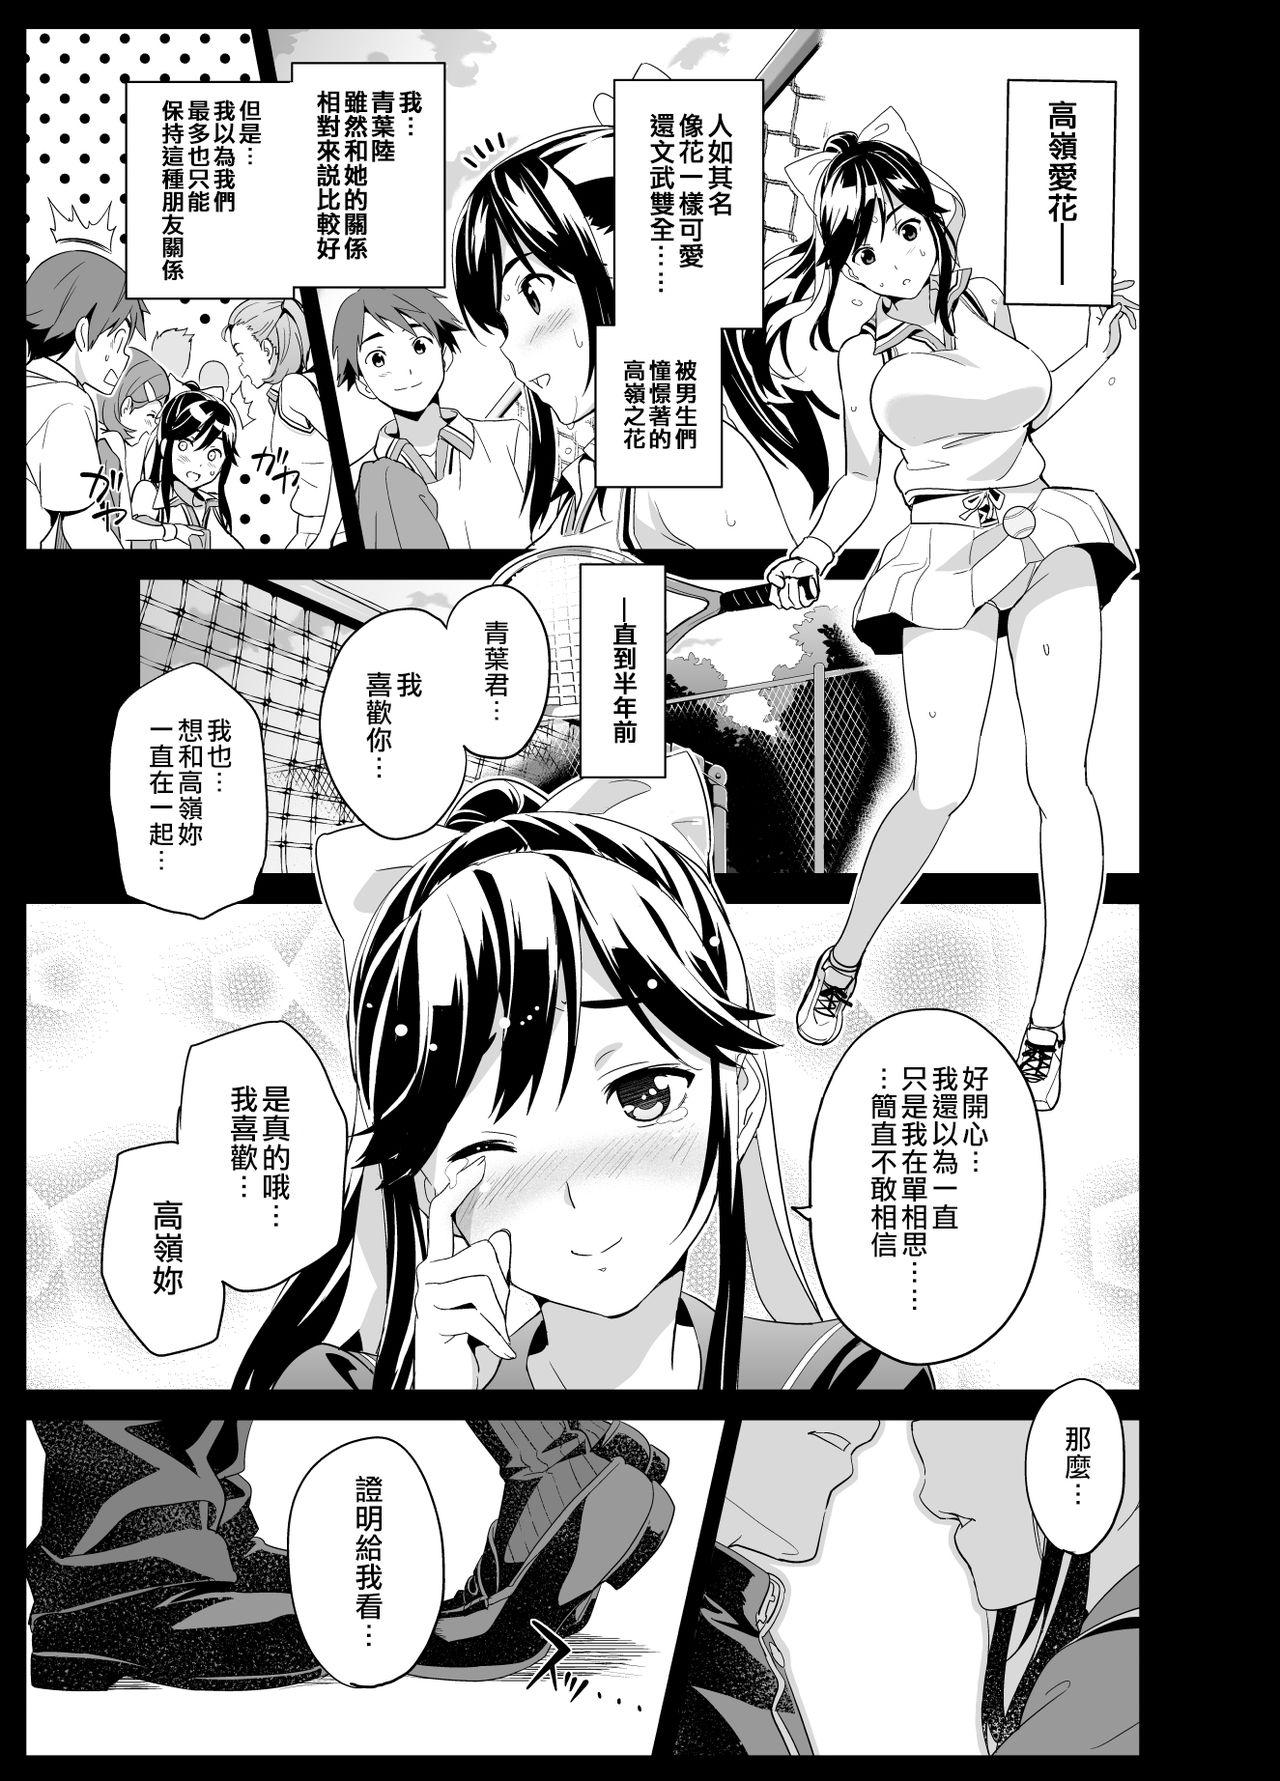 Foreplay Mana Tama Plus Soushuuhen - Love plus Pale - Page 10